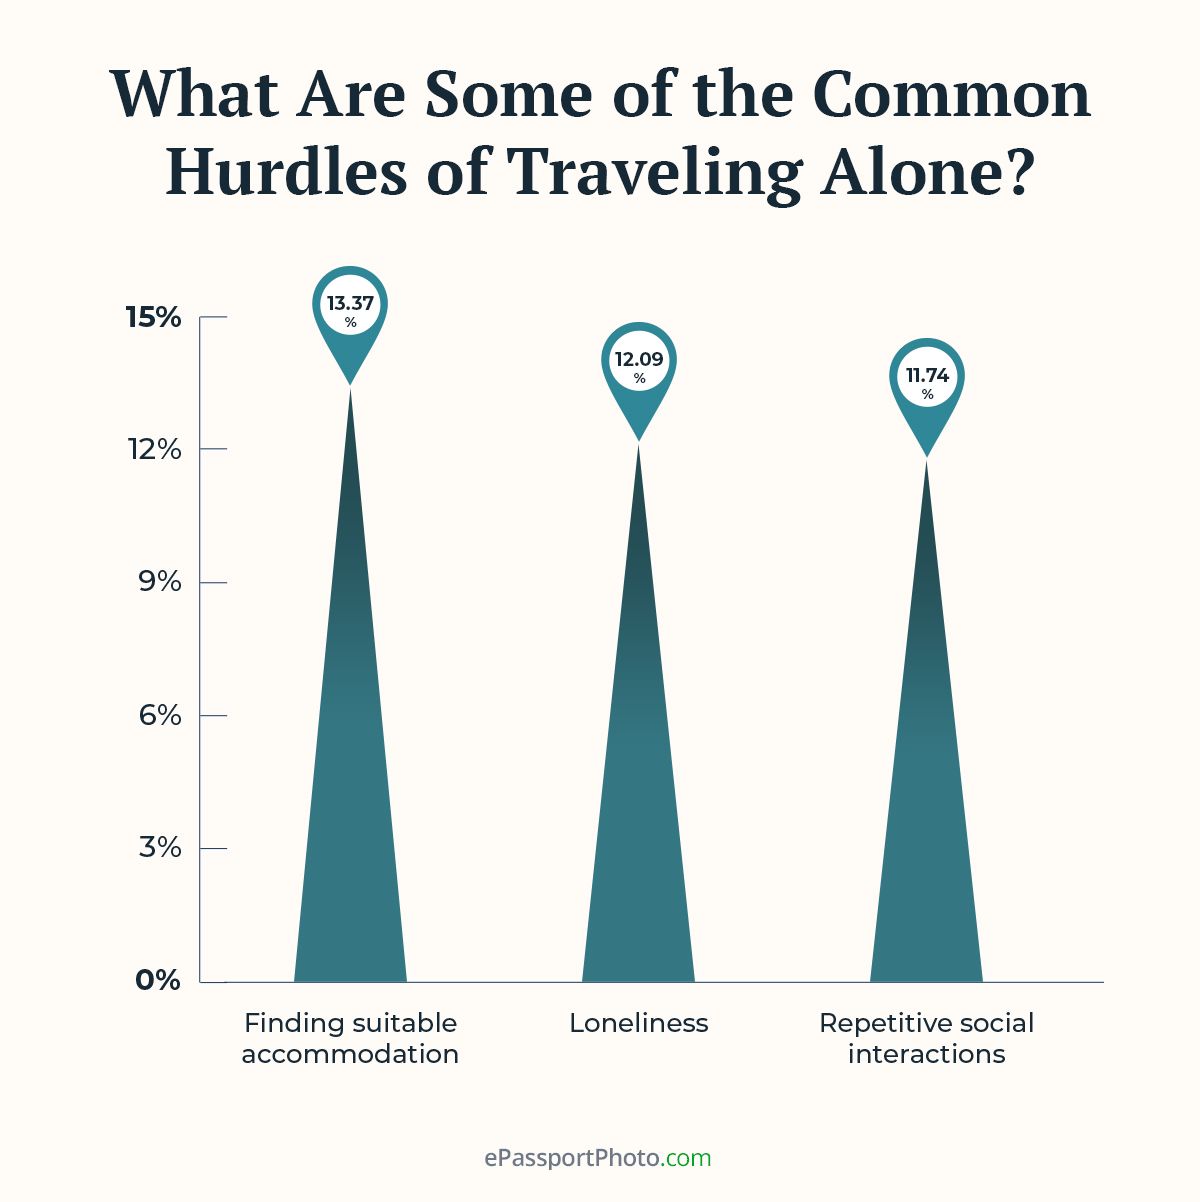 finding suitable accommodation (13.37%), loneliness (12.09%), and repetitive social interactions (11.74%) are some of the challenges of solo travel